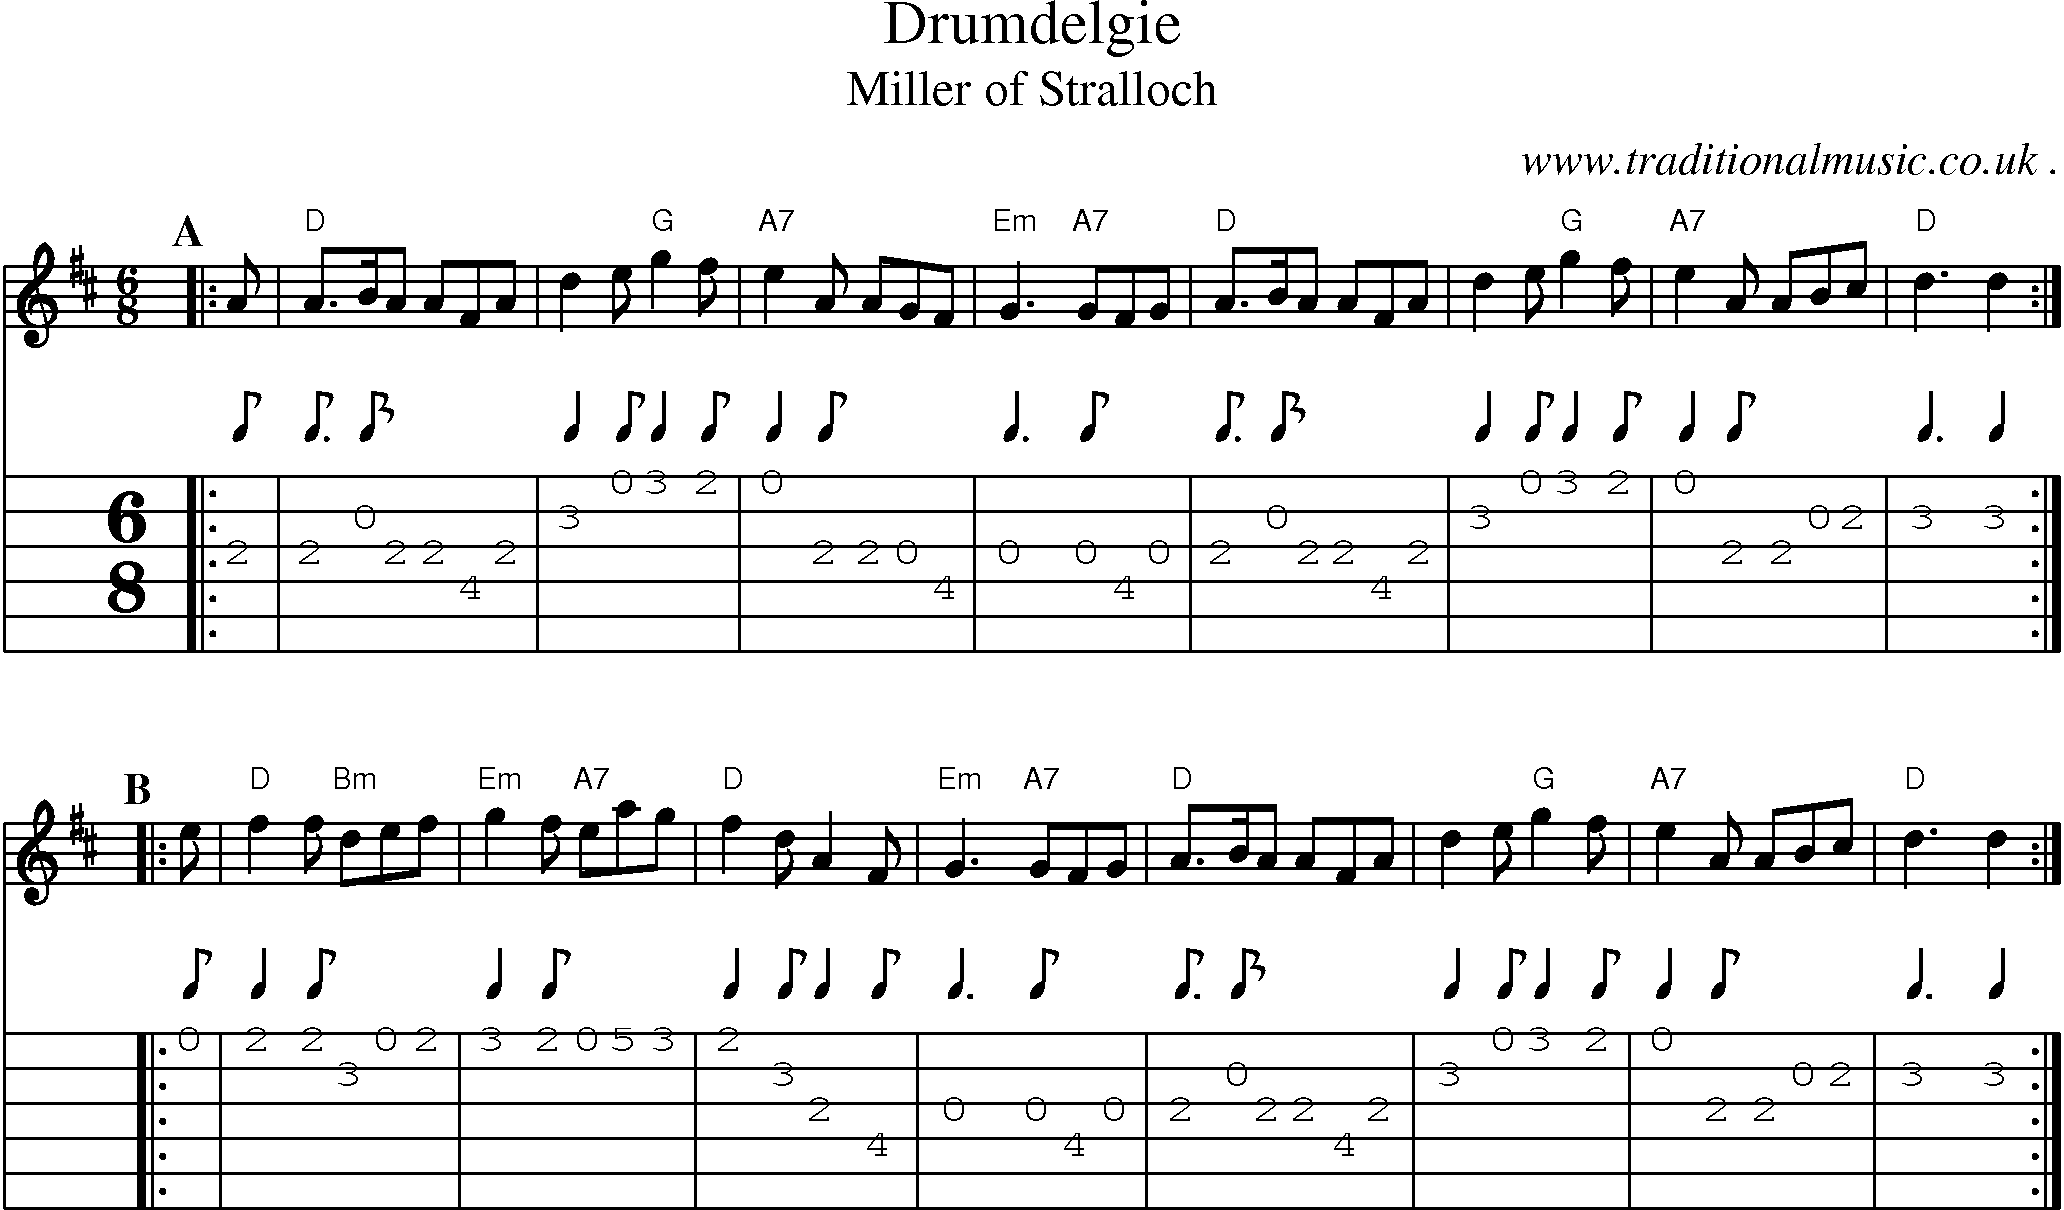 Sheet-music  score, Chords and Guitar Tabs for Drumdelgie